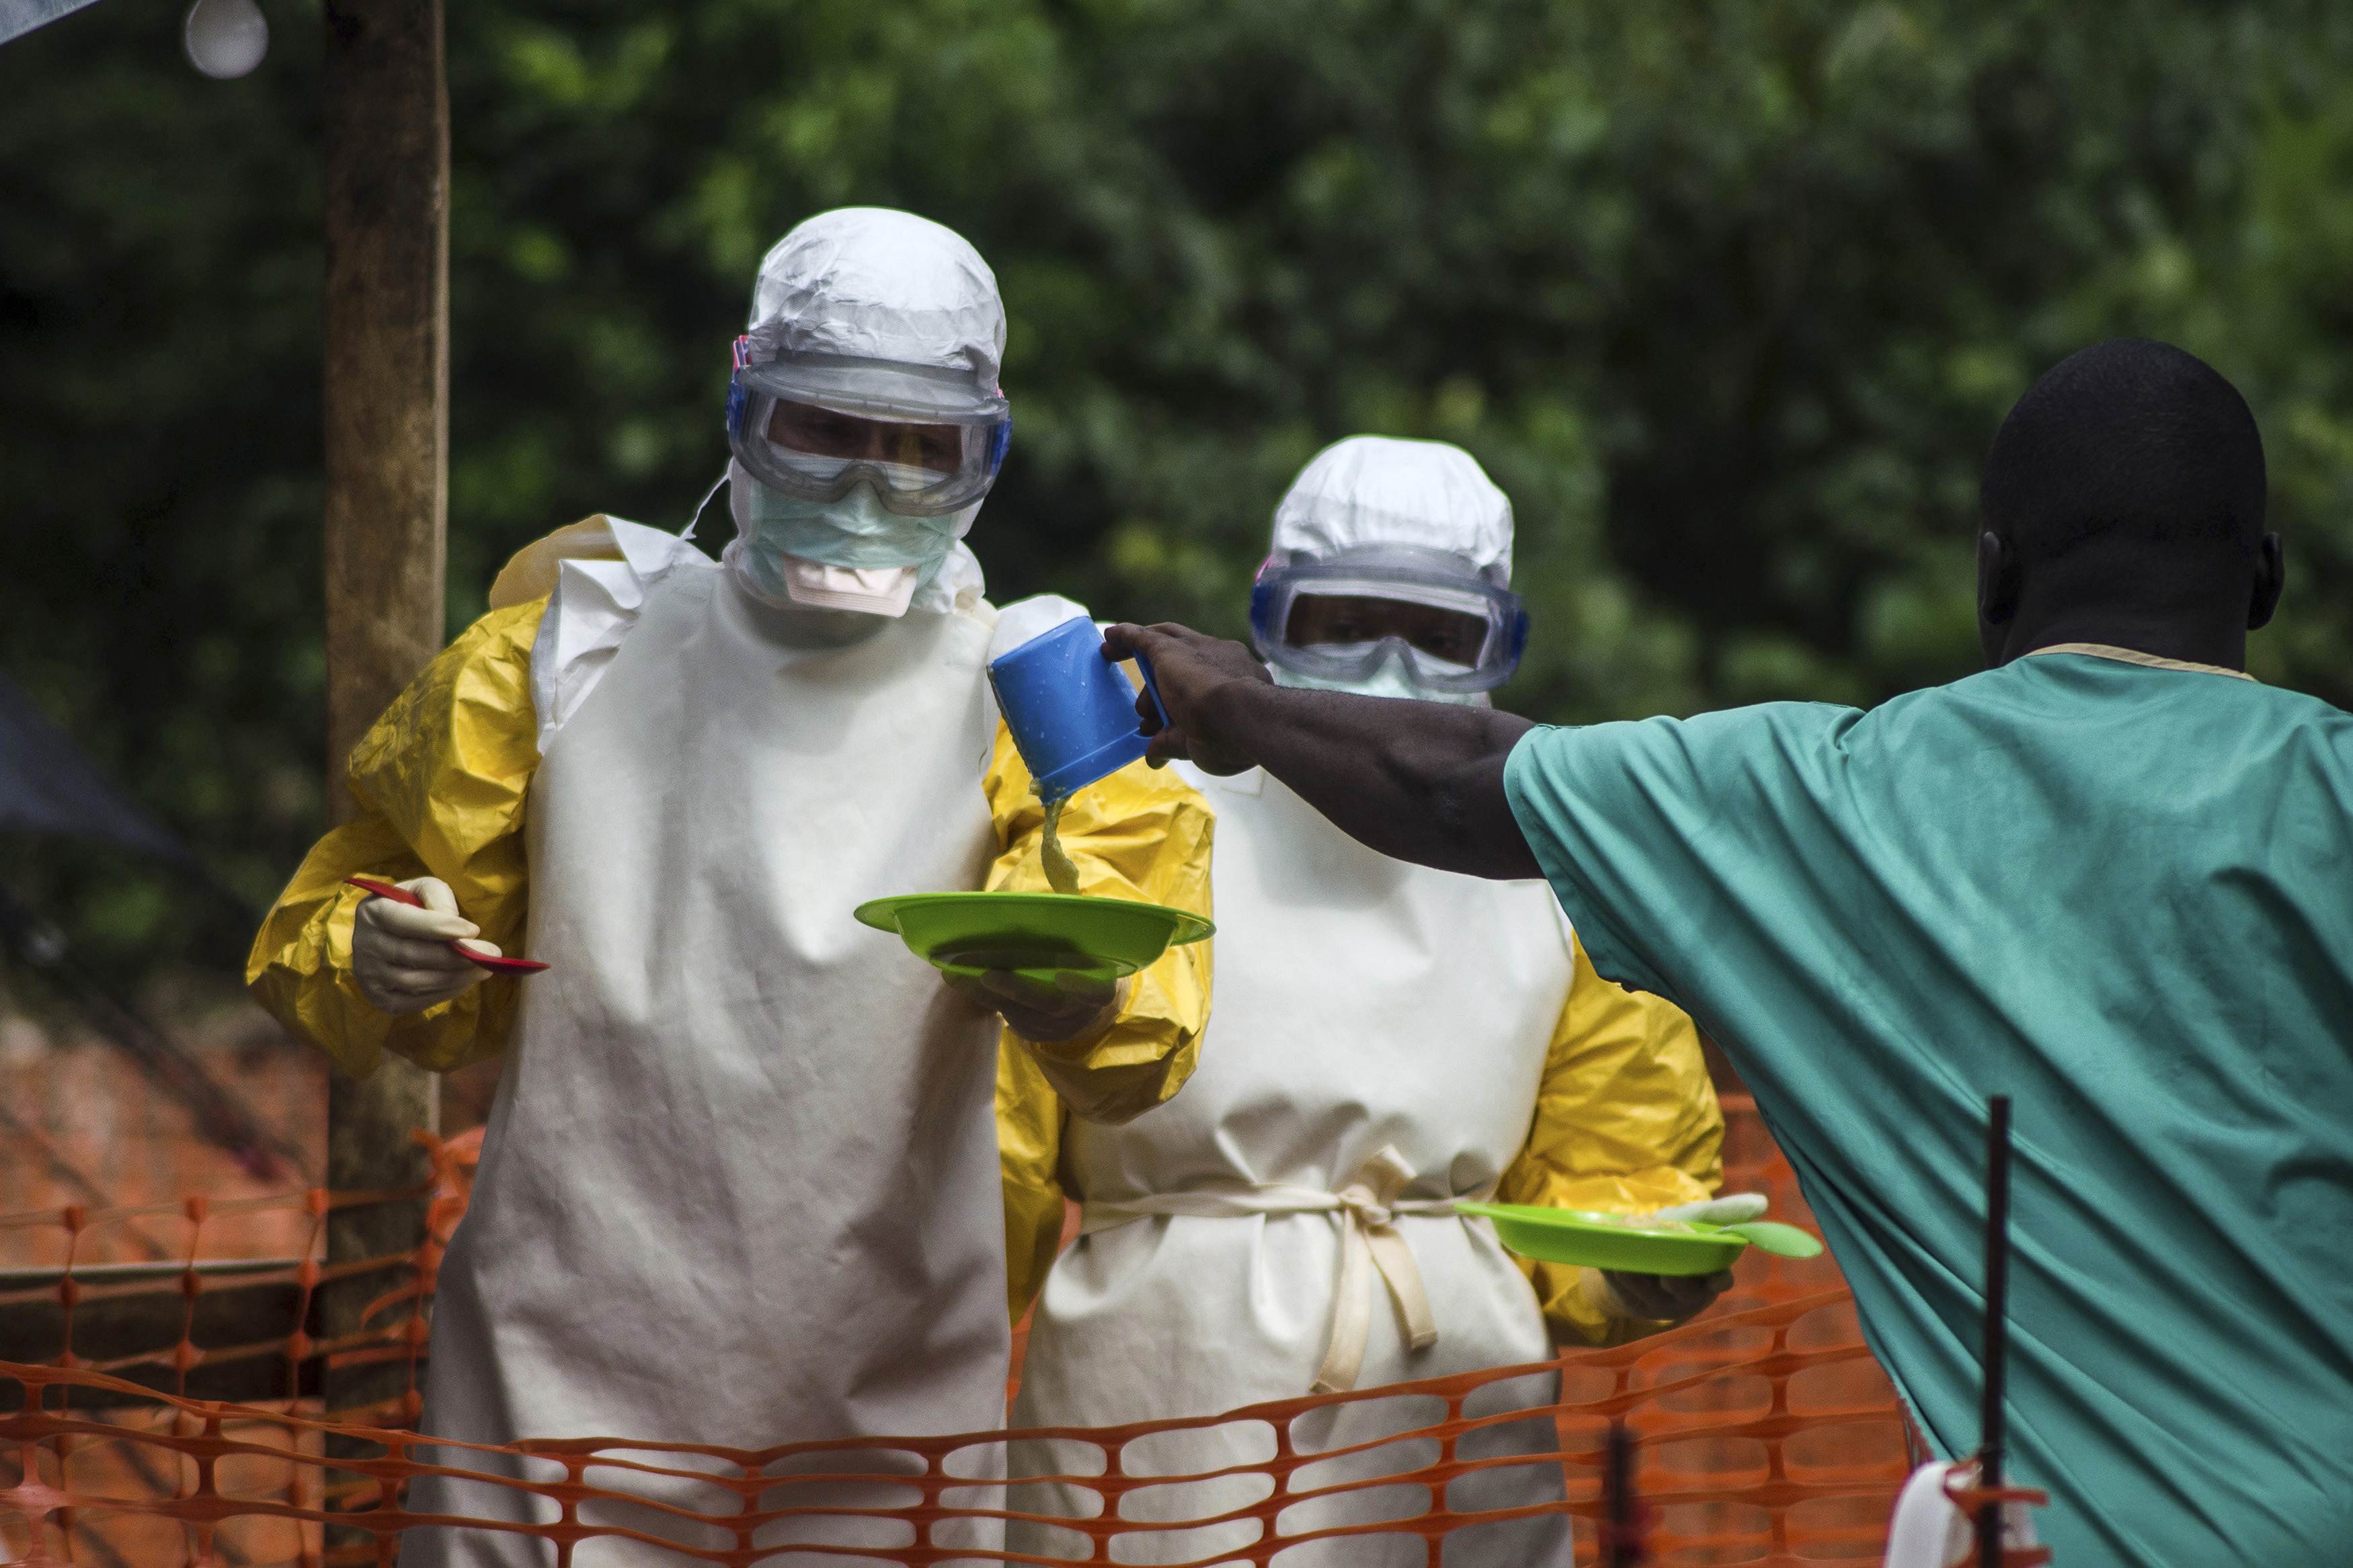 Medical staff working with Medecins sans Frontieres (MSF) prepare to bring food to patients kept in an isolation area at the MSF Ebola treatment centre in Kailahun, Sierra Leone on July 20, 2014. (Reuters)